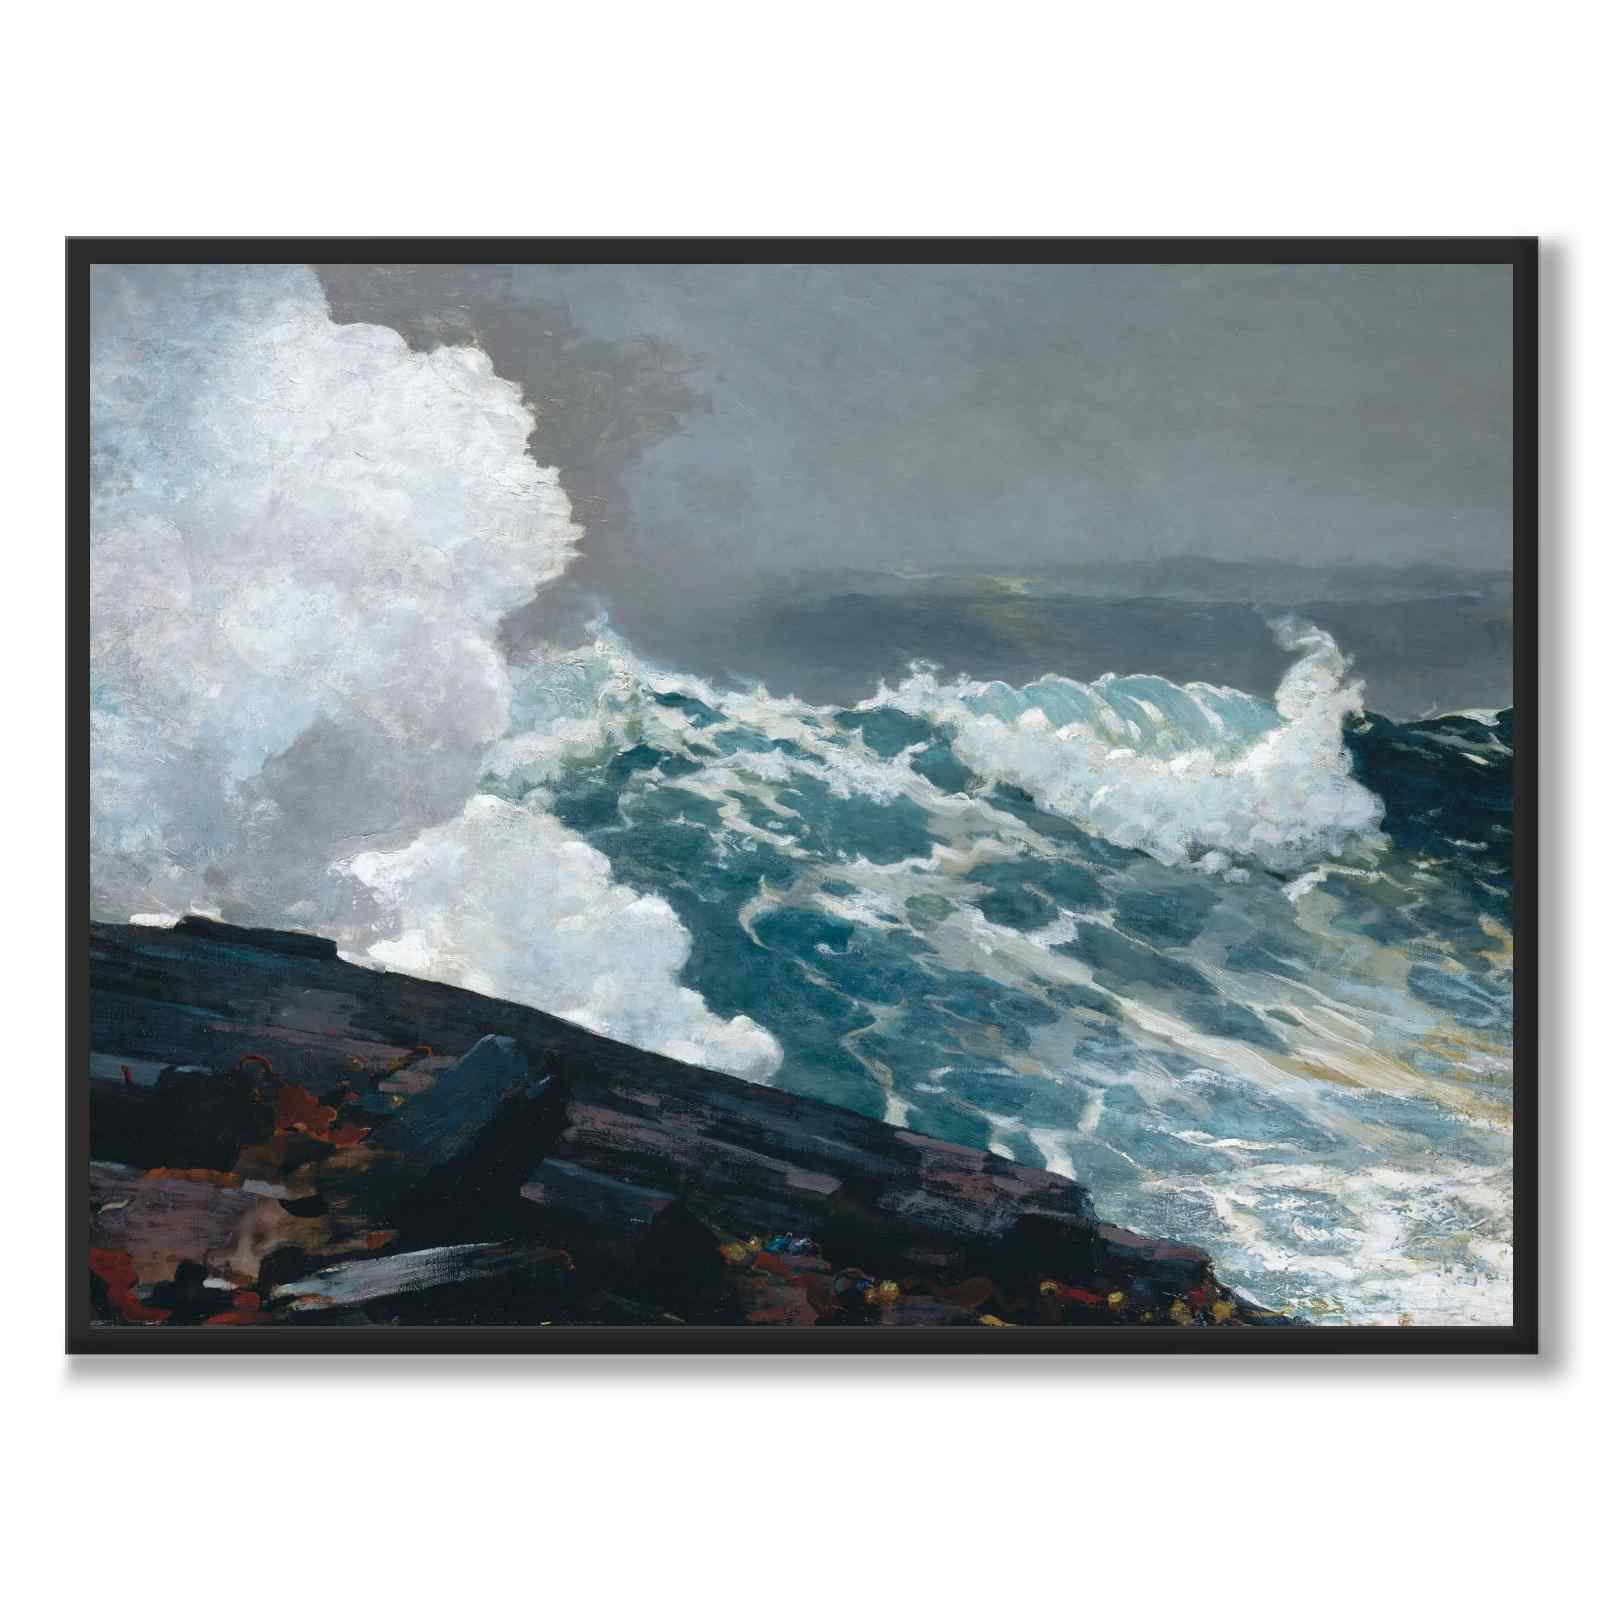 Northeaster - Poster